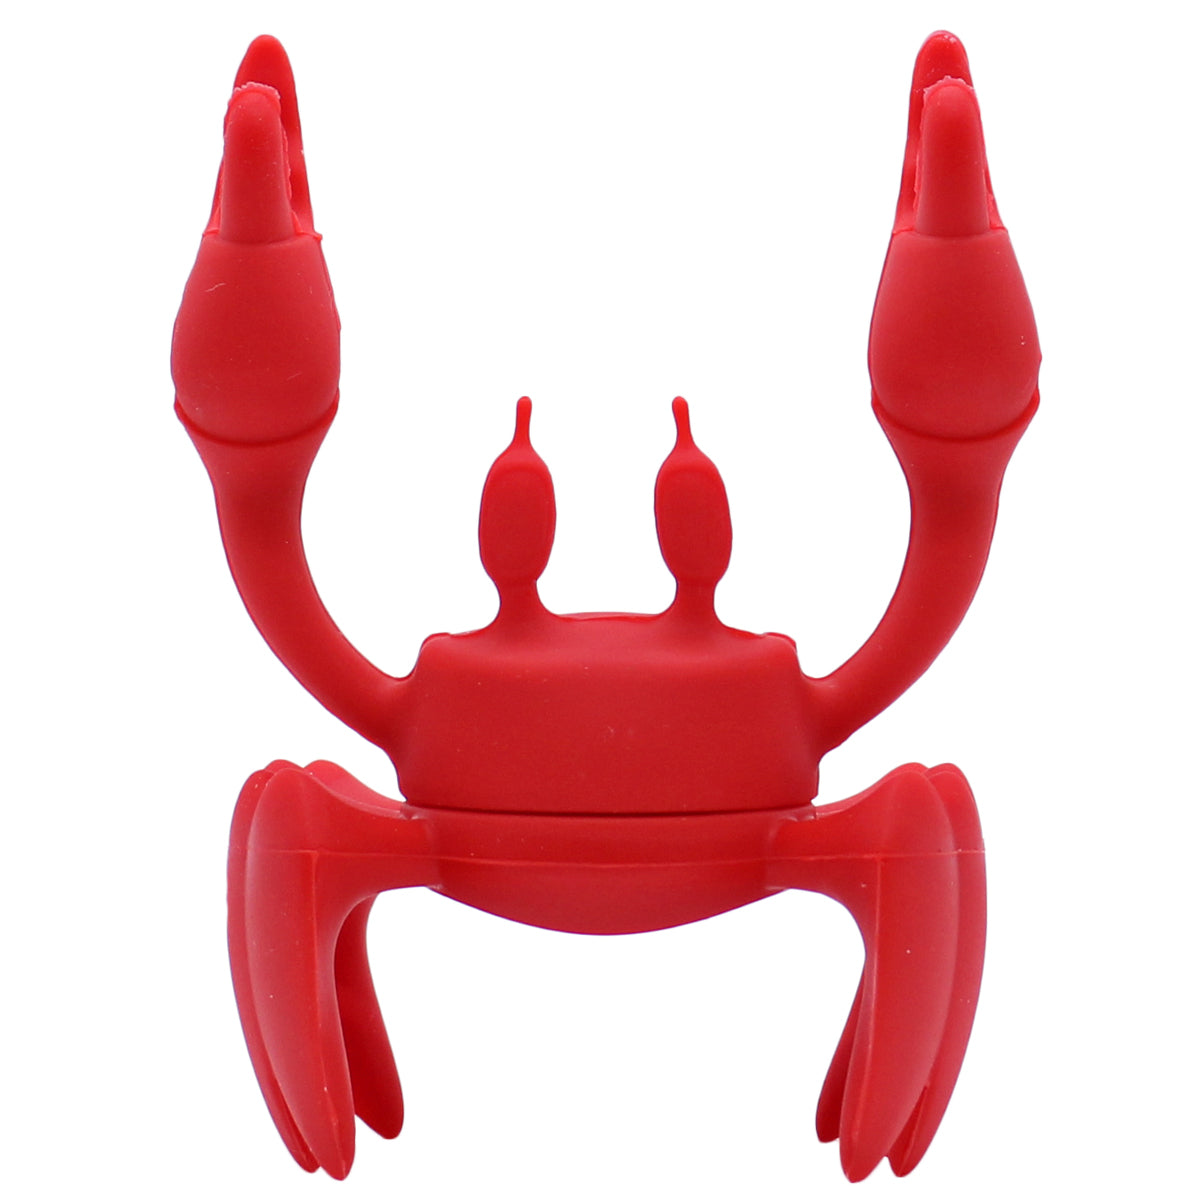 Blue Crab Spoon Rest/Holder (Holds 1 Spoon) by Blue Crab Bay Co